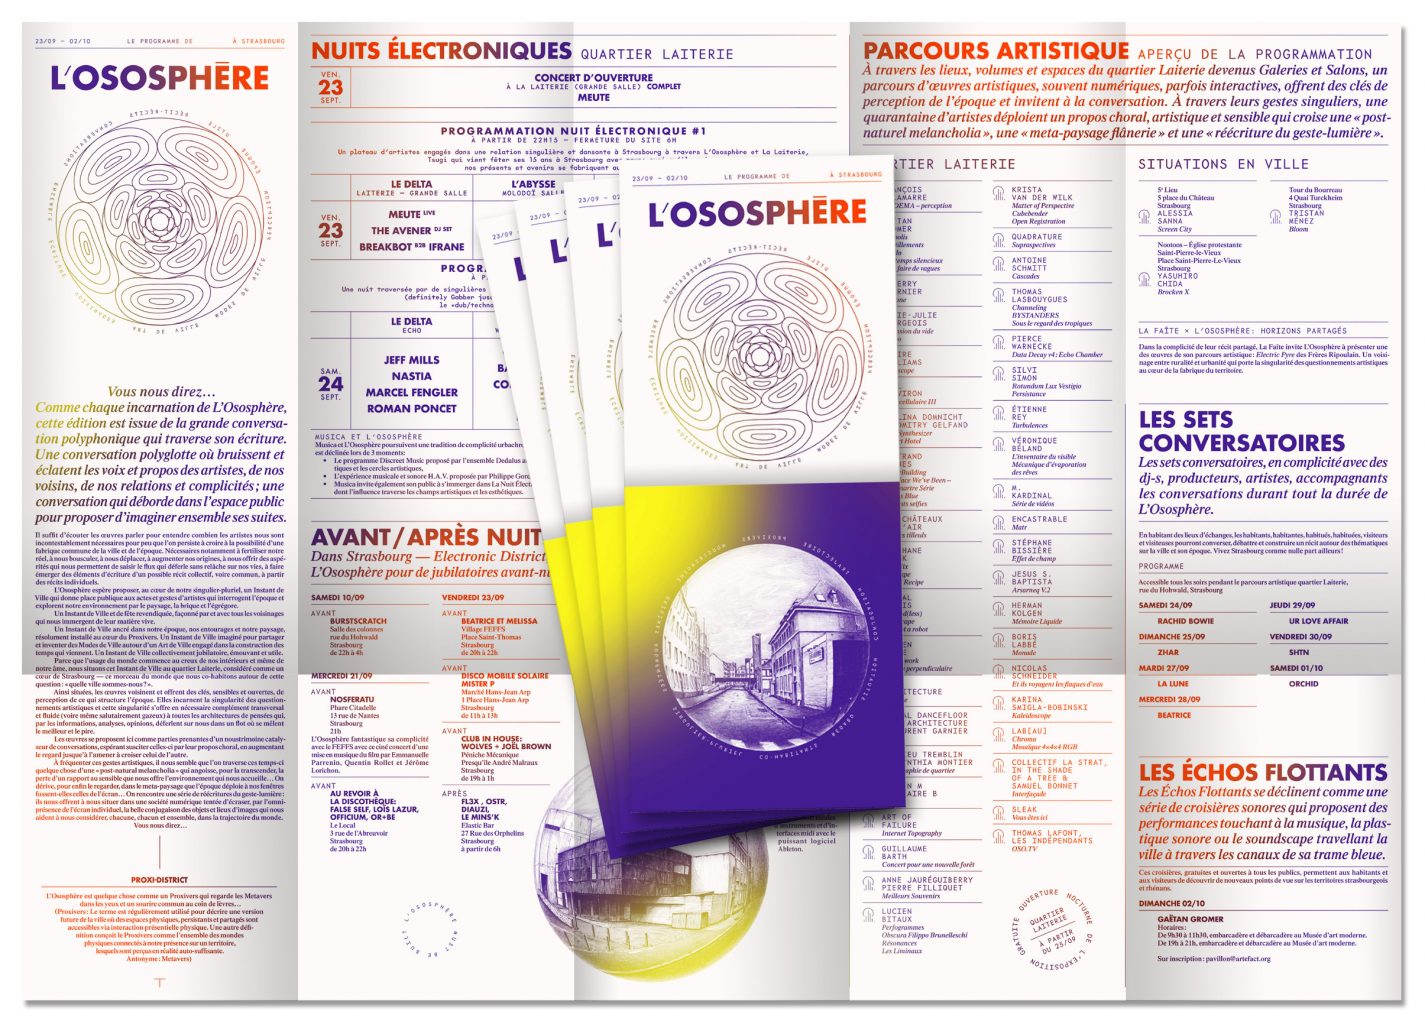 Illustrations, posters, leaflet, L’Ososphère Festival, Septembre 2022, designed by In the shade of a tree studio, founded by Sophie Demay and Maël Fournier Comte, joined by Jimmy Cintero.